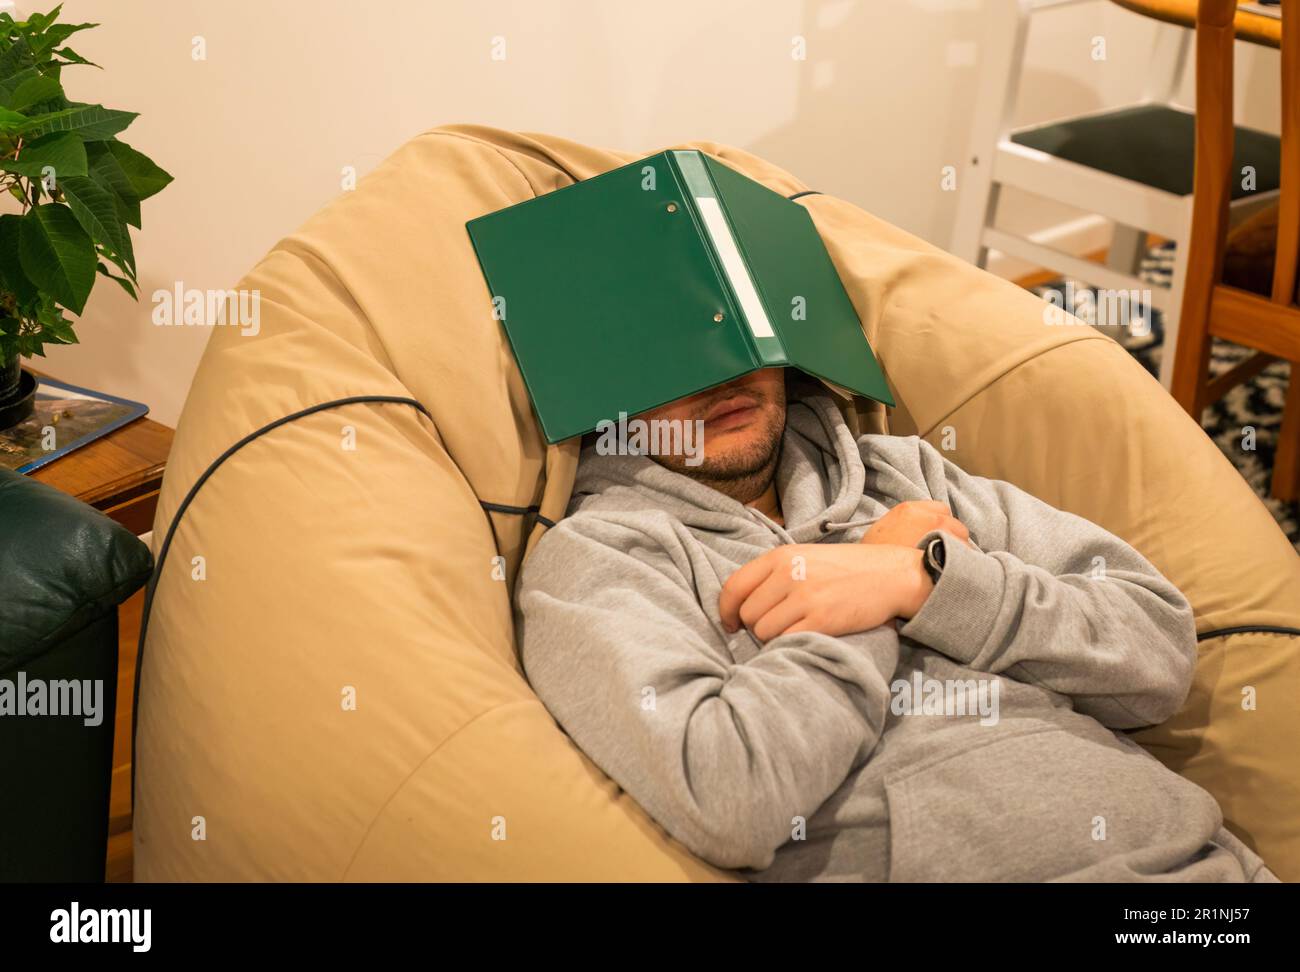 Young man lying on bean bag, face covered by green folder. Taking a break from study concepts. Stock Photo